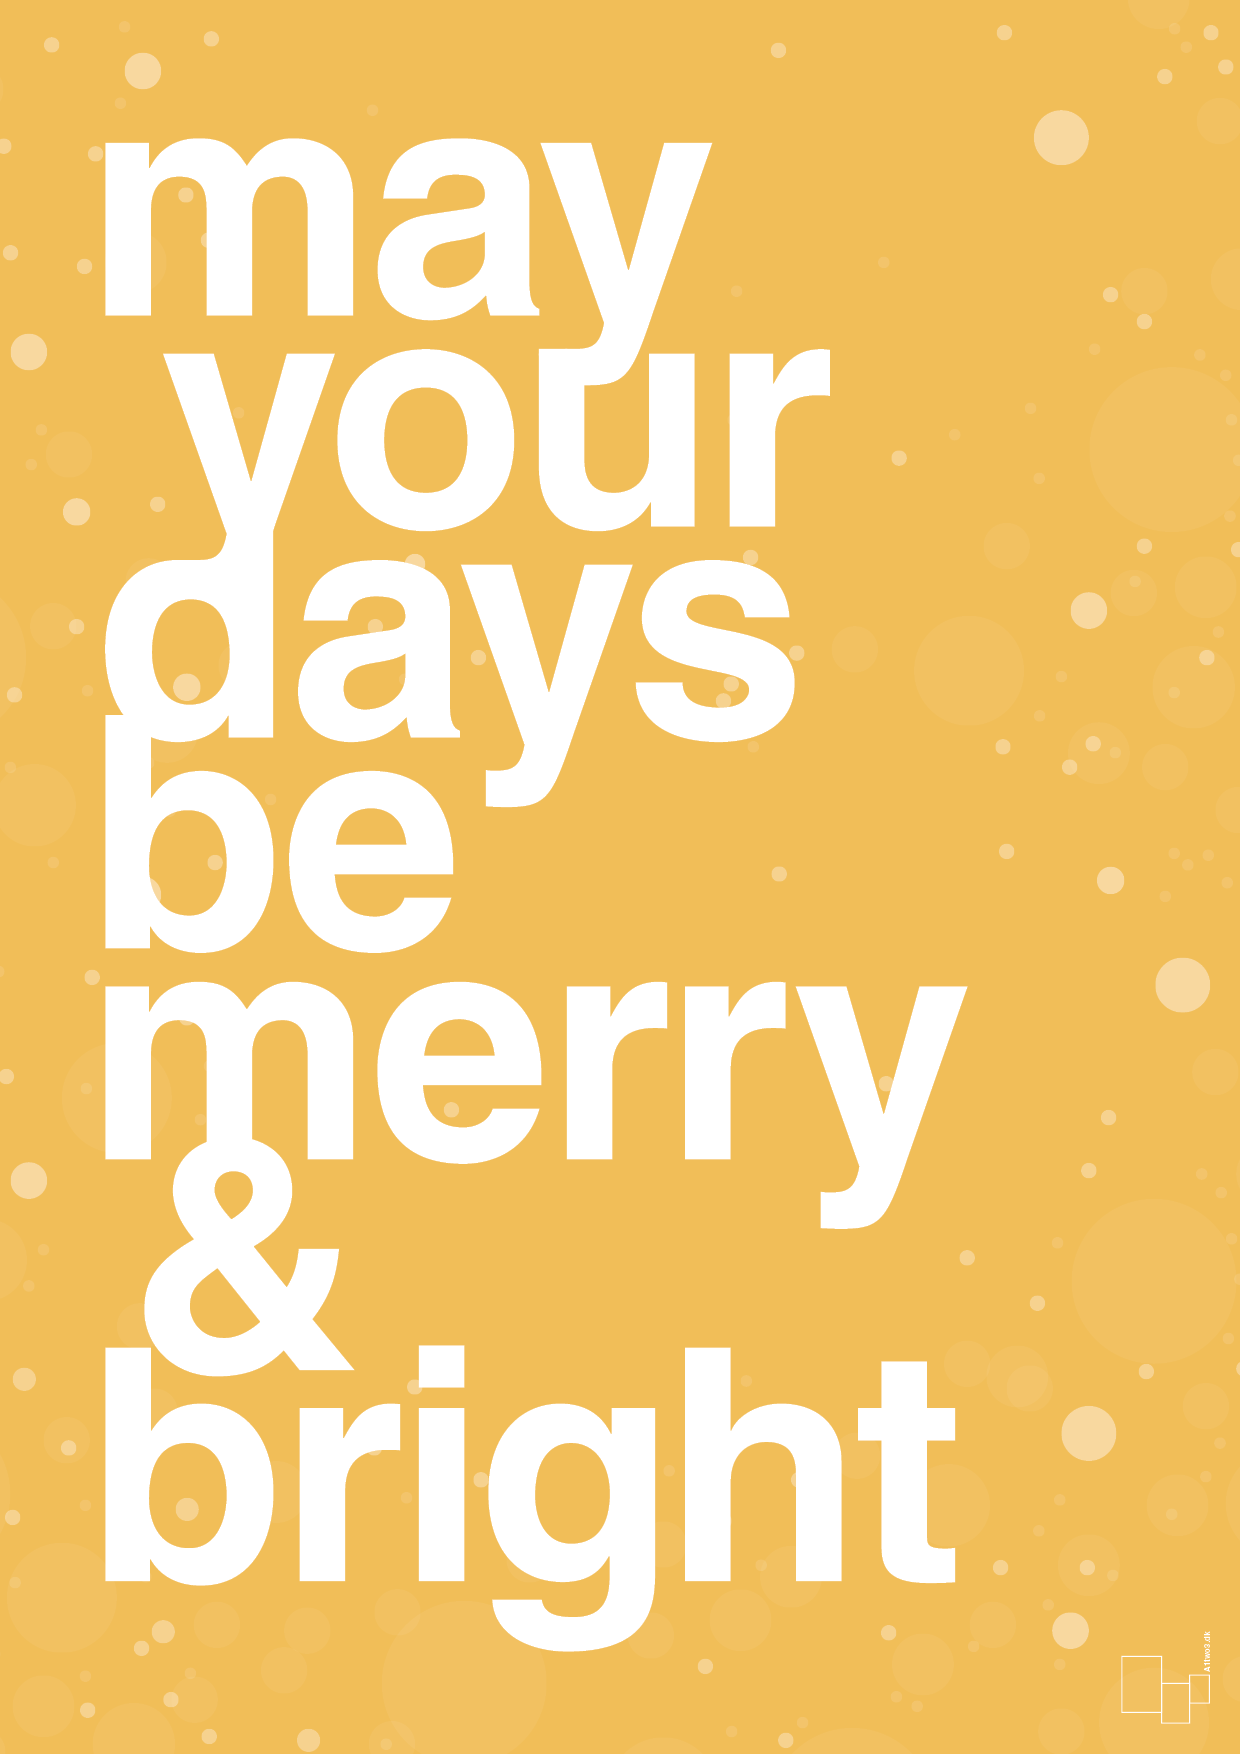 may your days be merry and bright - Plakat med Begivenheder i Honeycomb